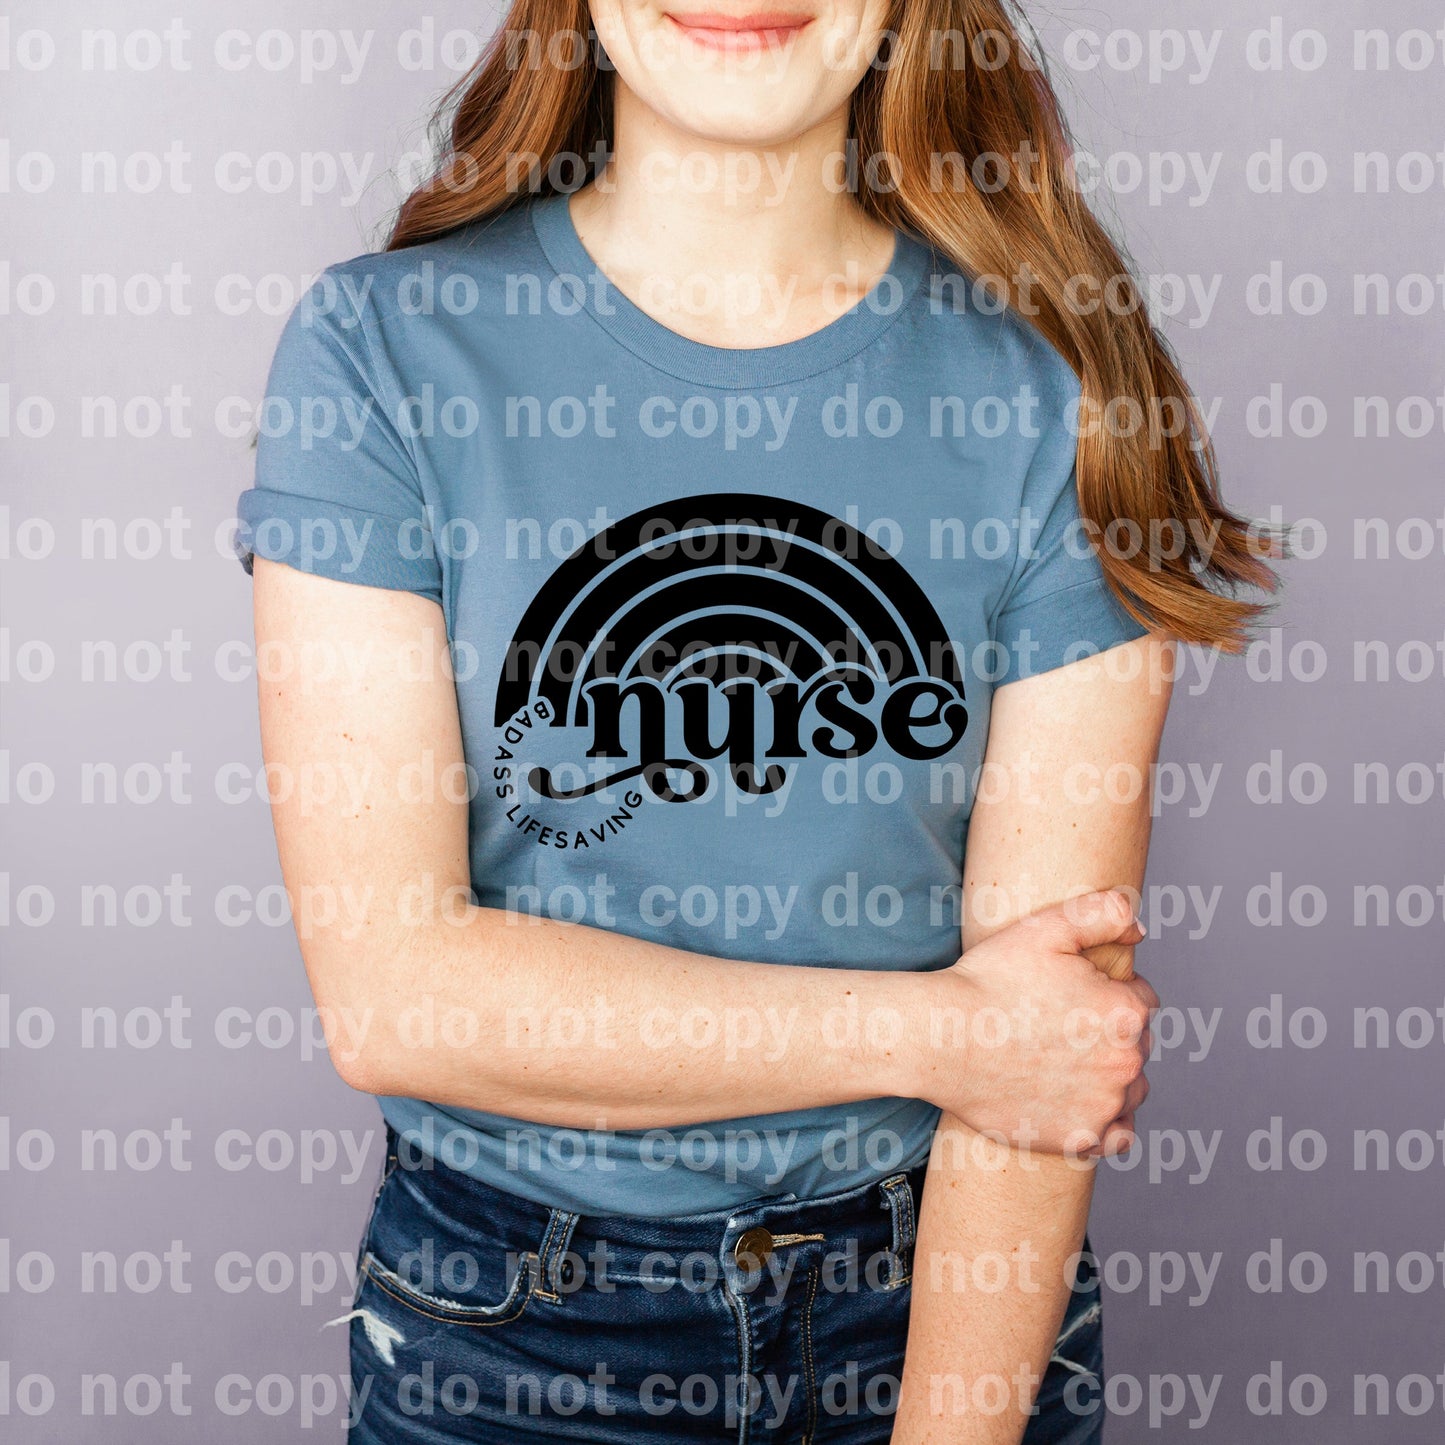 Bad Ass Life Saving Nurse Full Color/One Color Dream Print or Sublimation Print